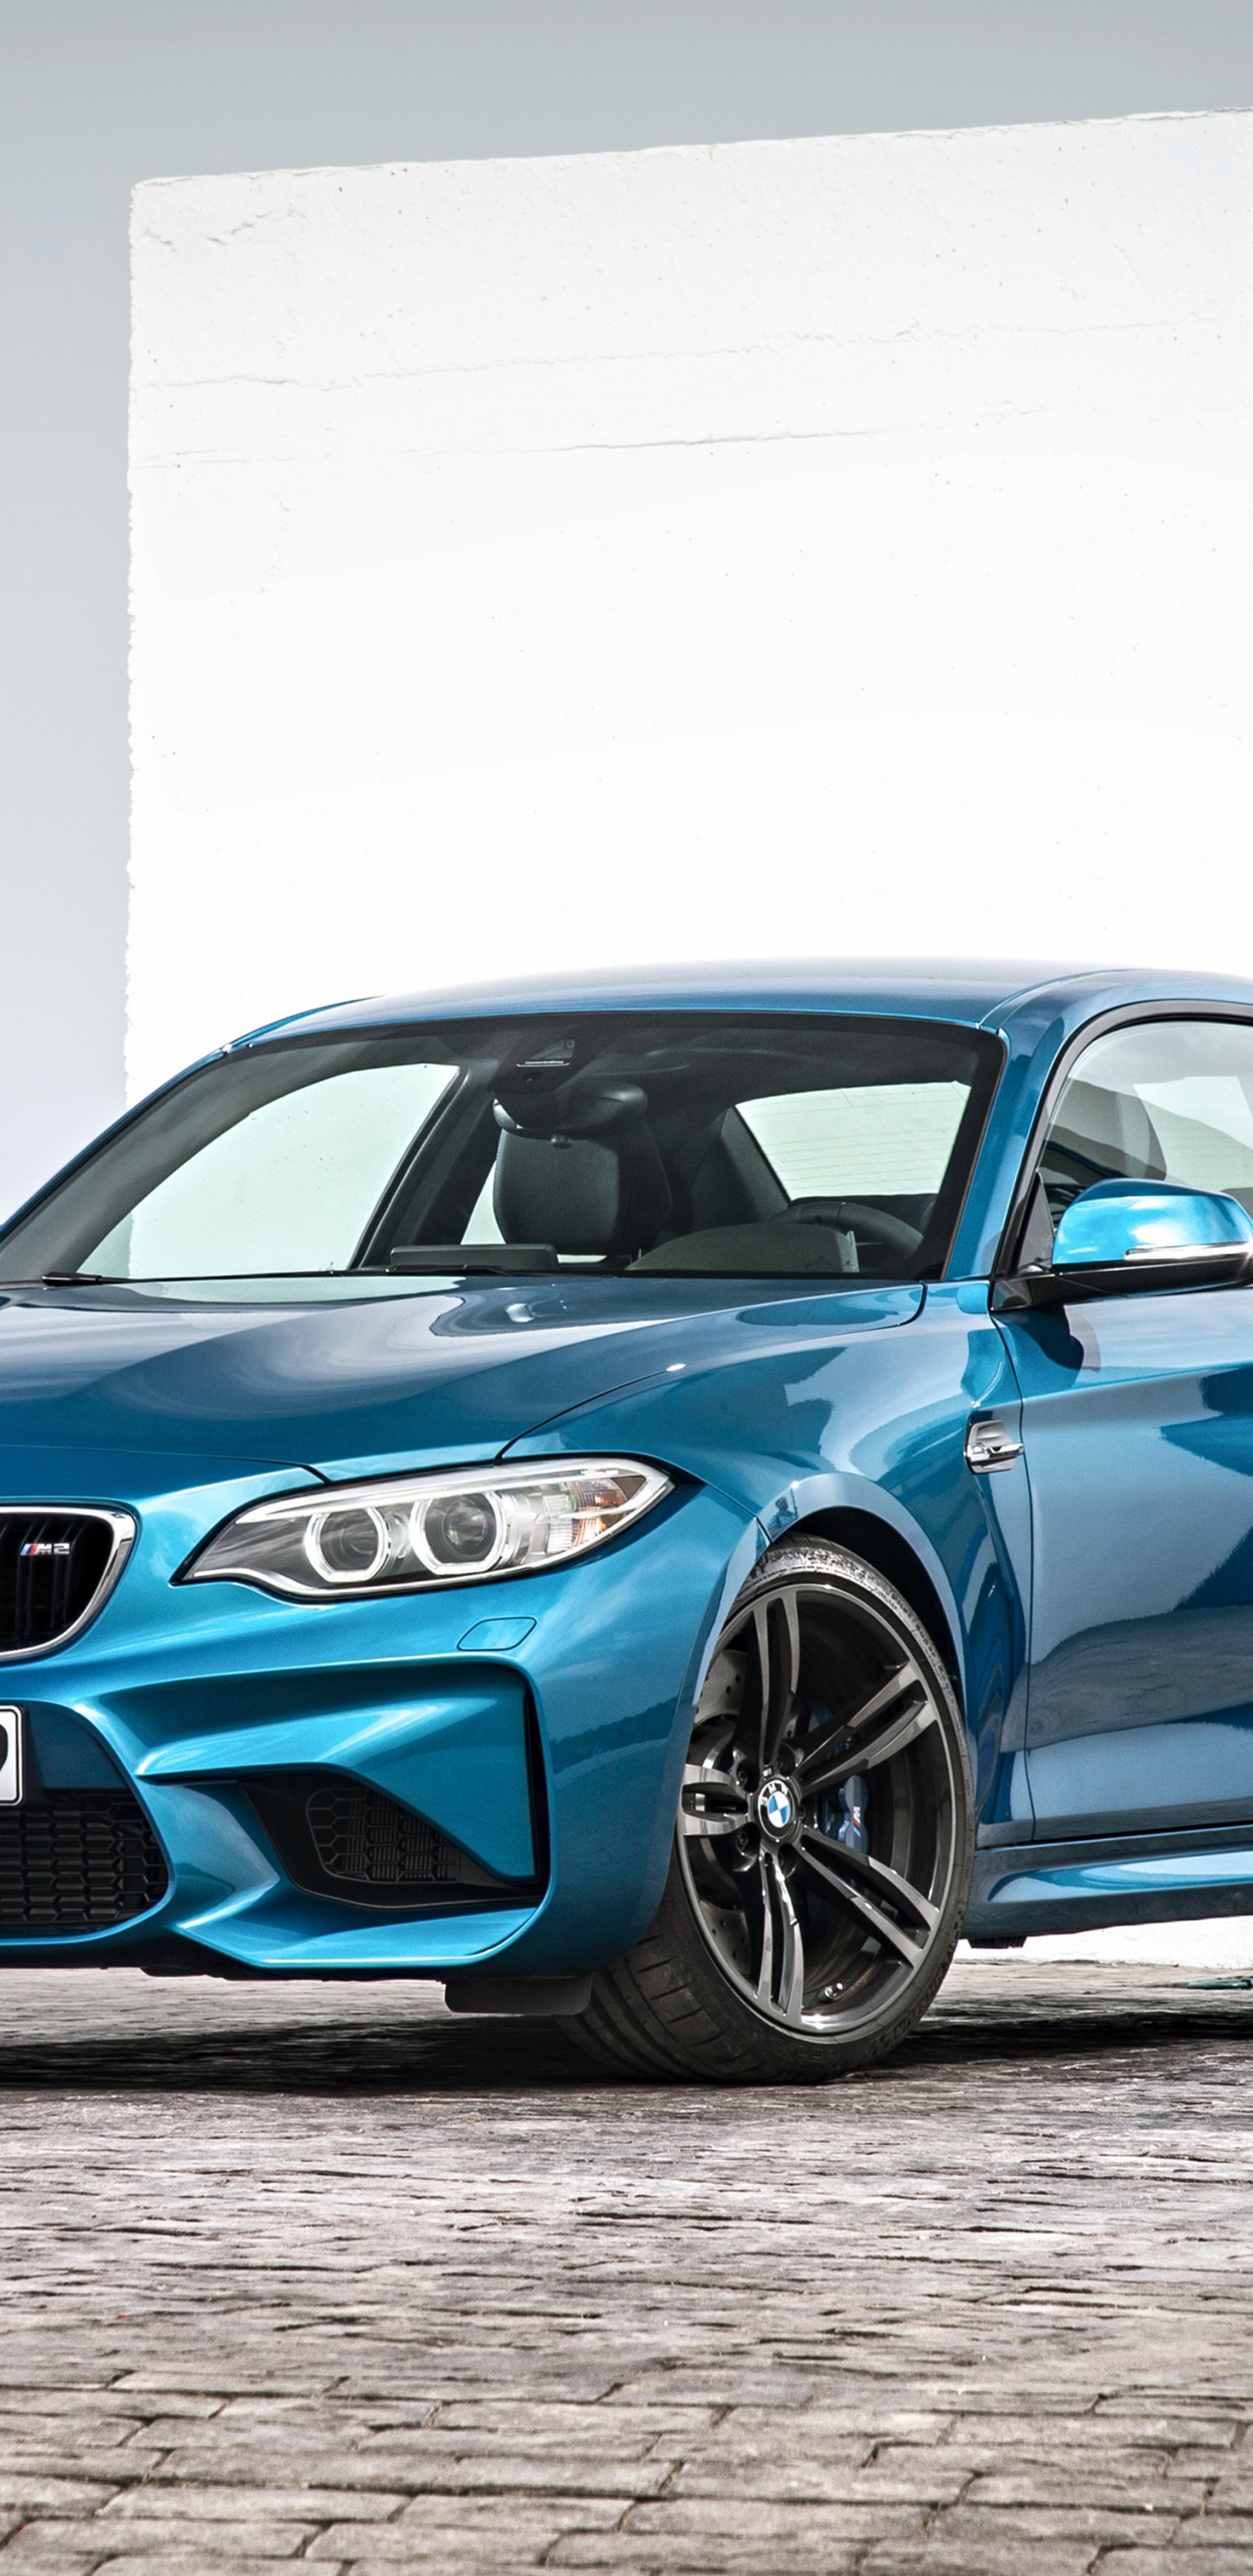 Blue Bmw m 3 Coupe. Wallpaper in 1440x2960 Resolution